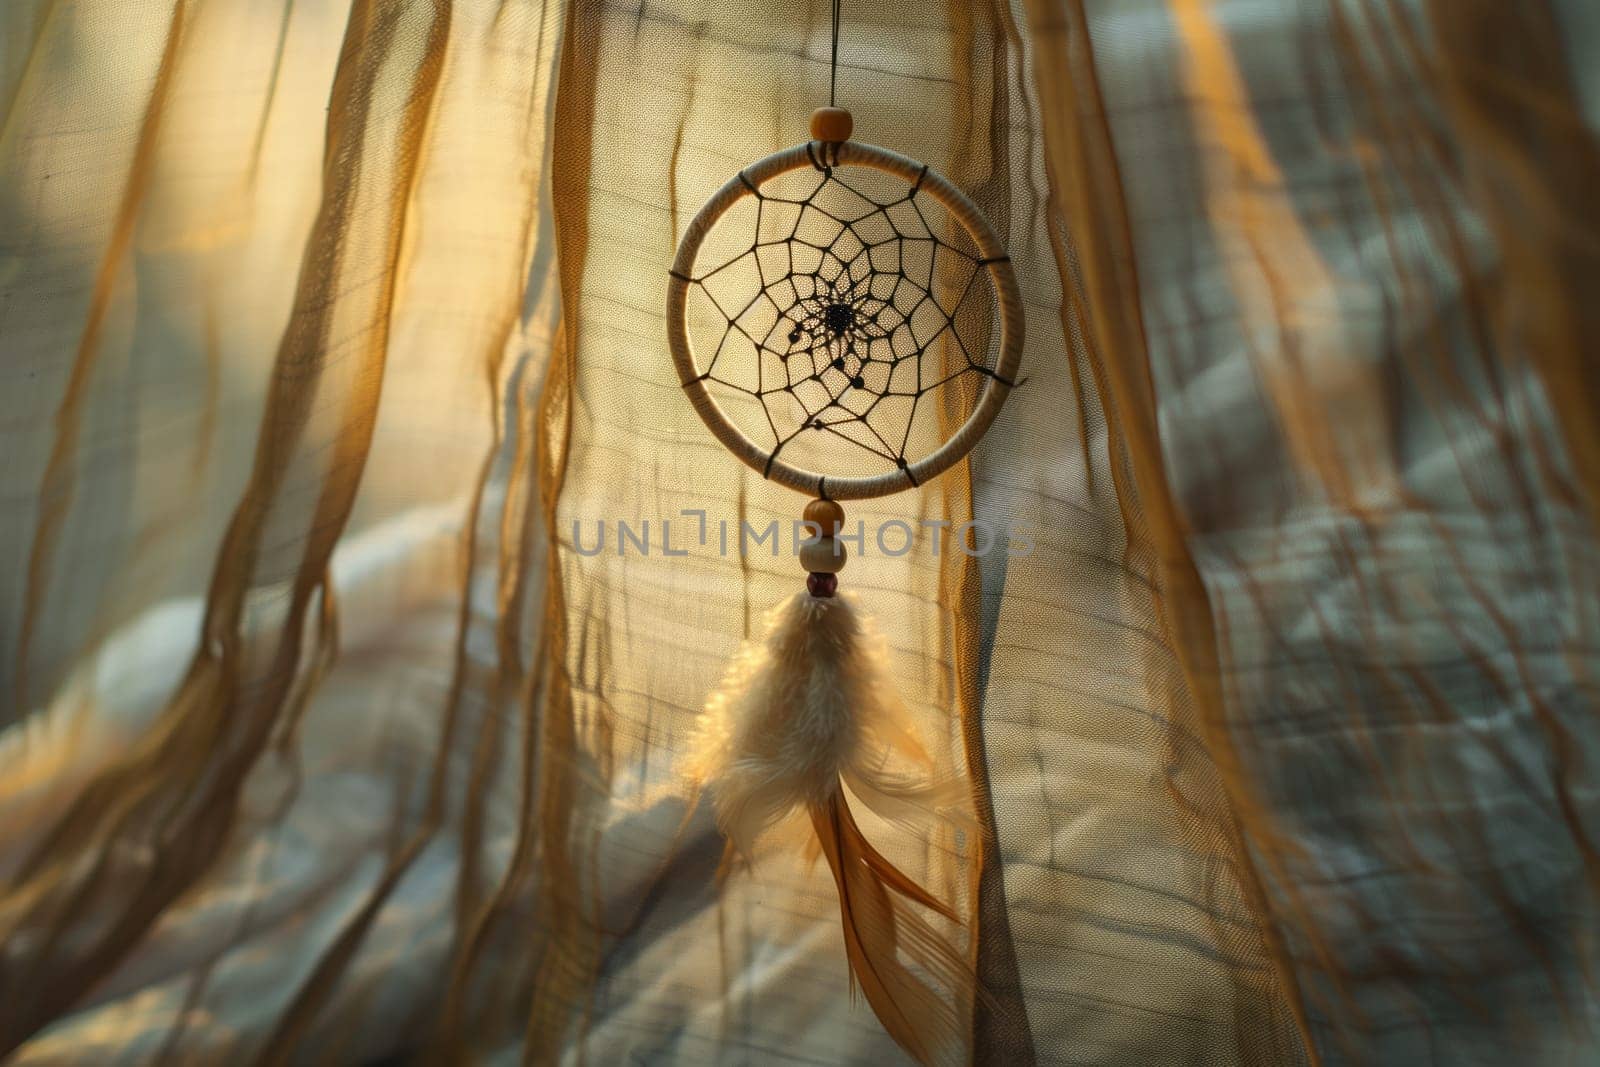 A closeup of a dream catcher made of wood, twigs, metal, and mesh hanging from a curtain. The intricate pattern creates tints and shades on the glass beads, resembling a trunk in the wildlife